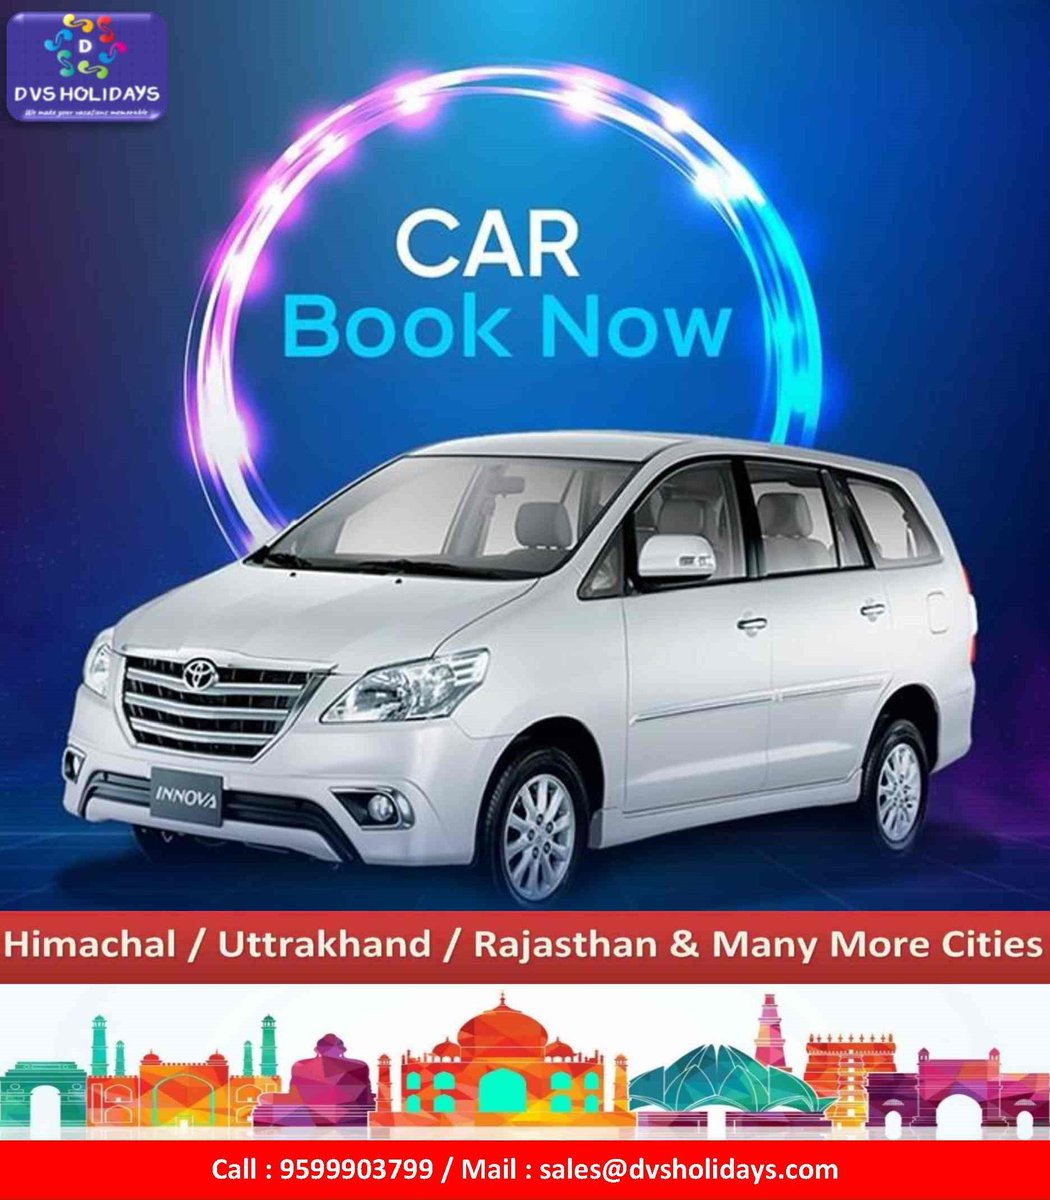 Do the unexpected to make the ordinary extraordinary
#carrental #carhire #booknow #travelwithus #bookcab #bookcabindia #chardhamcarhire